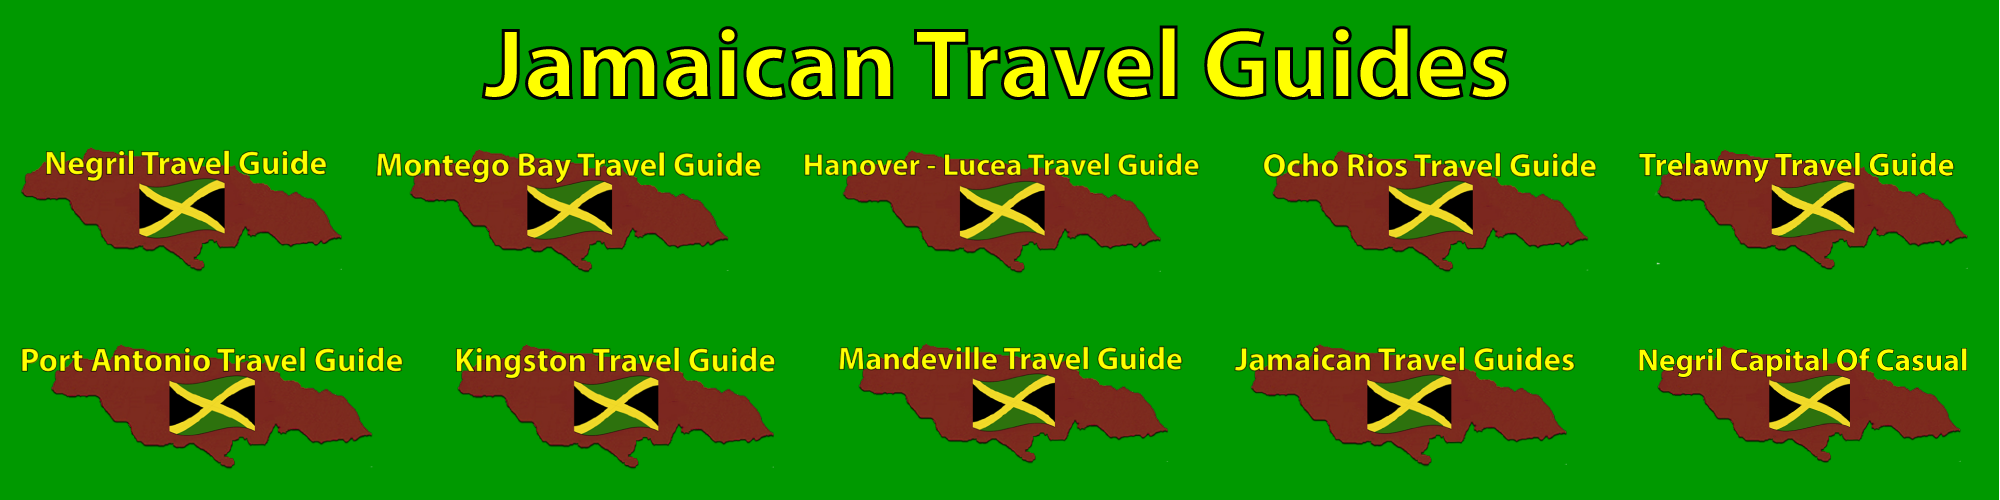 Jamaican Travel Guides